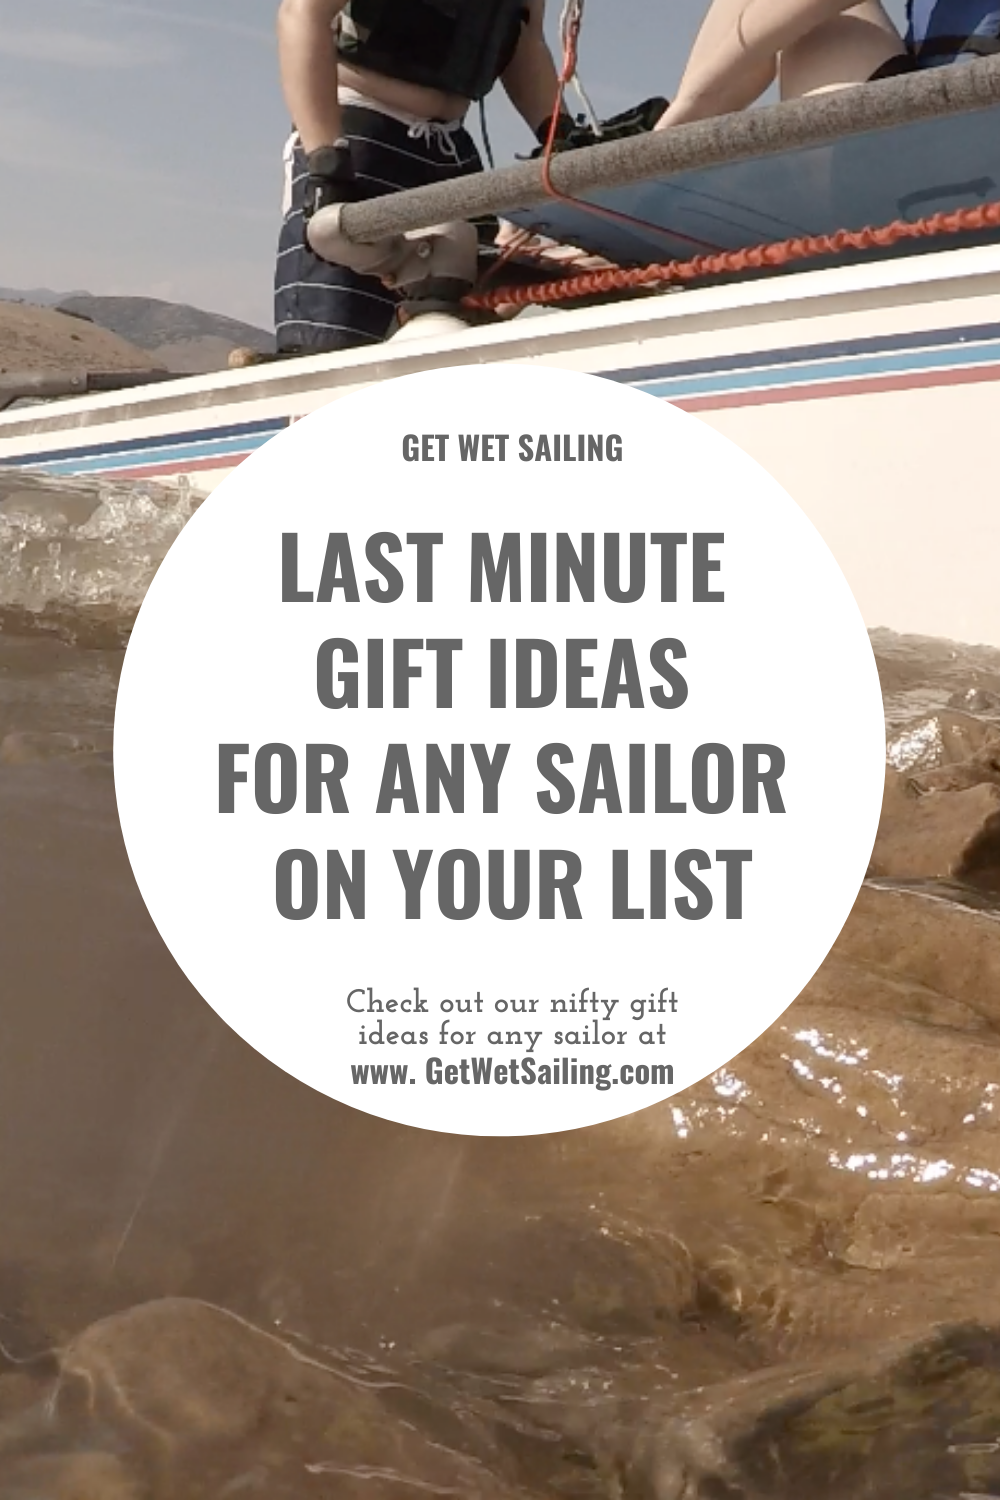 Last minute gift ideas for any sailor on your list.